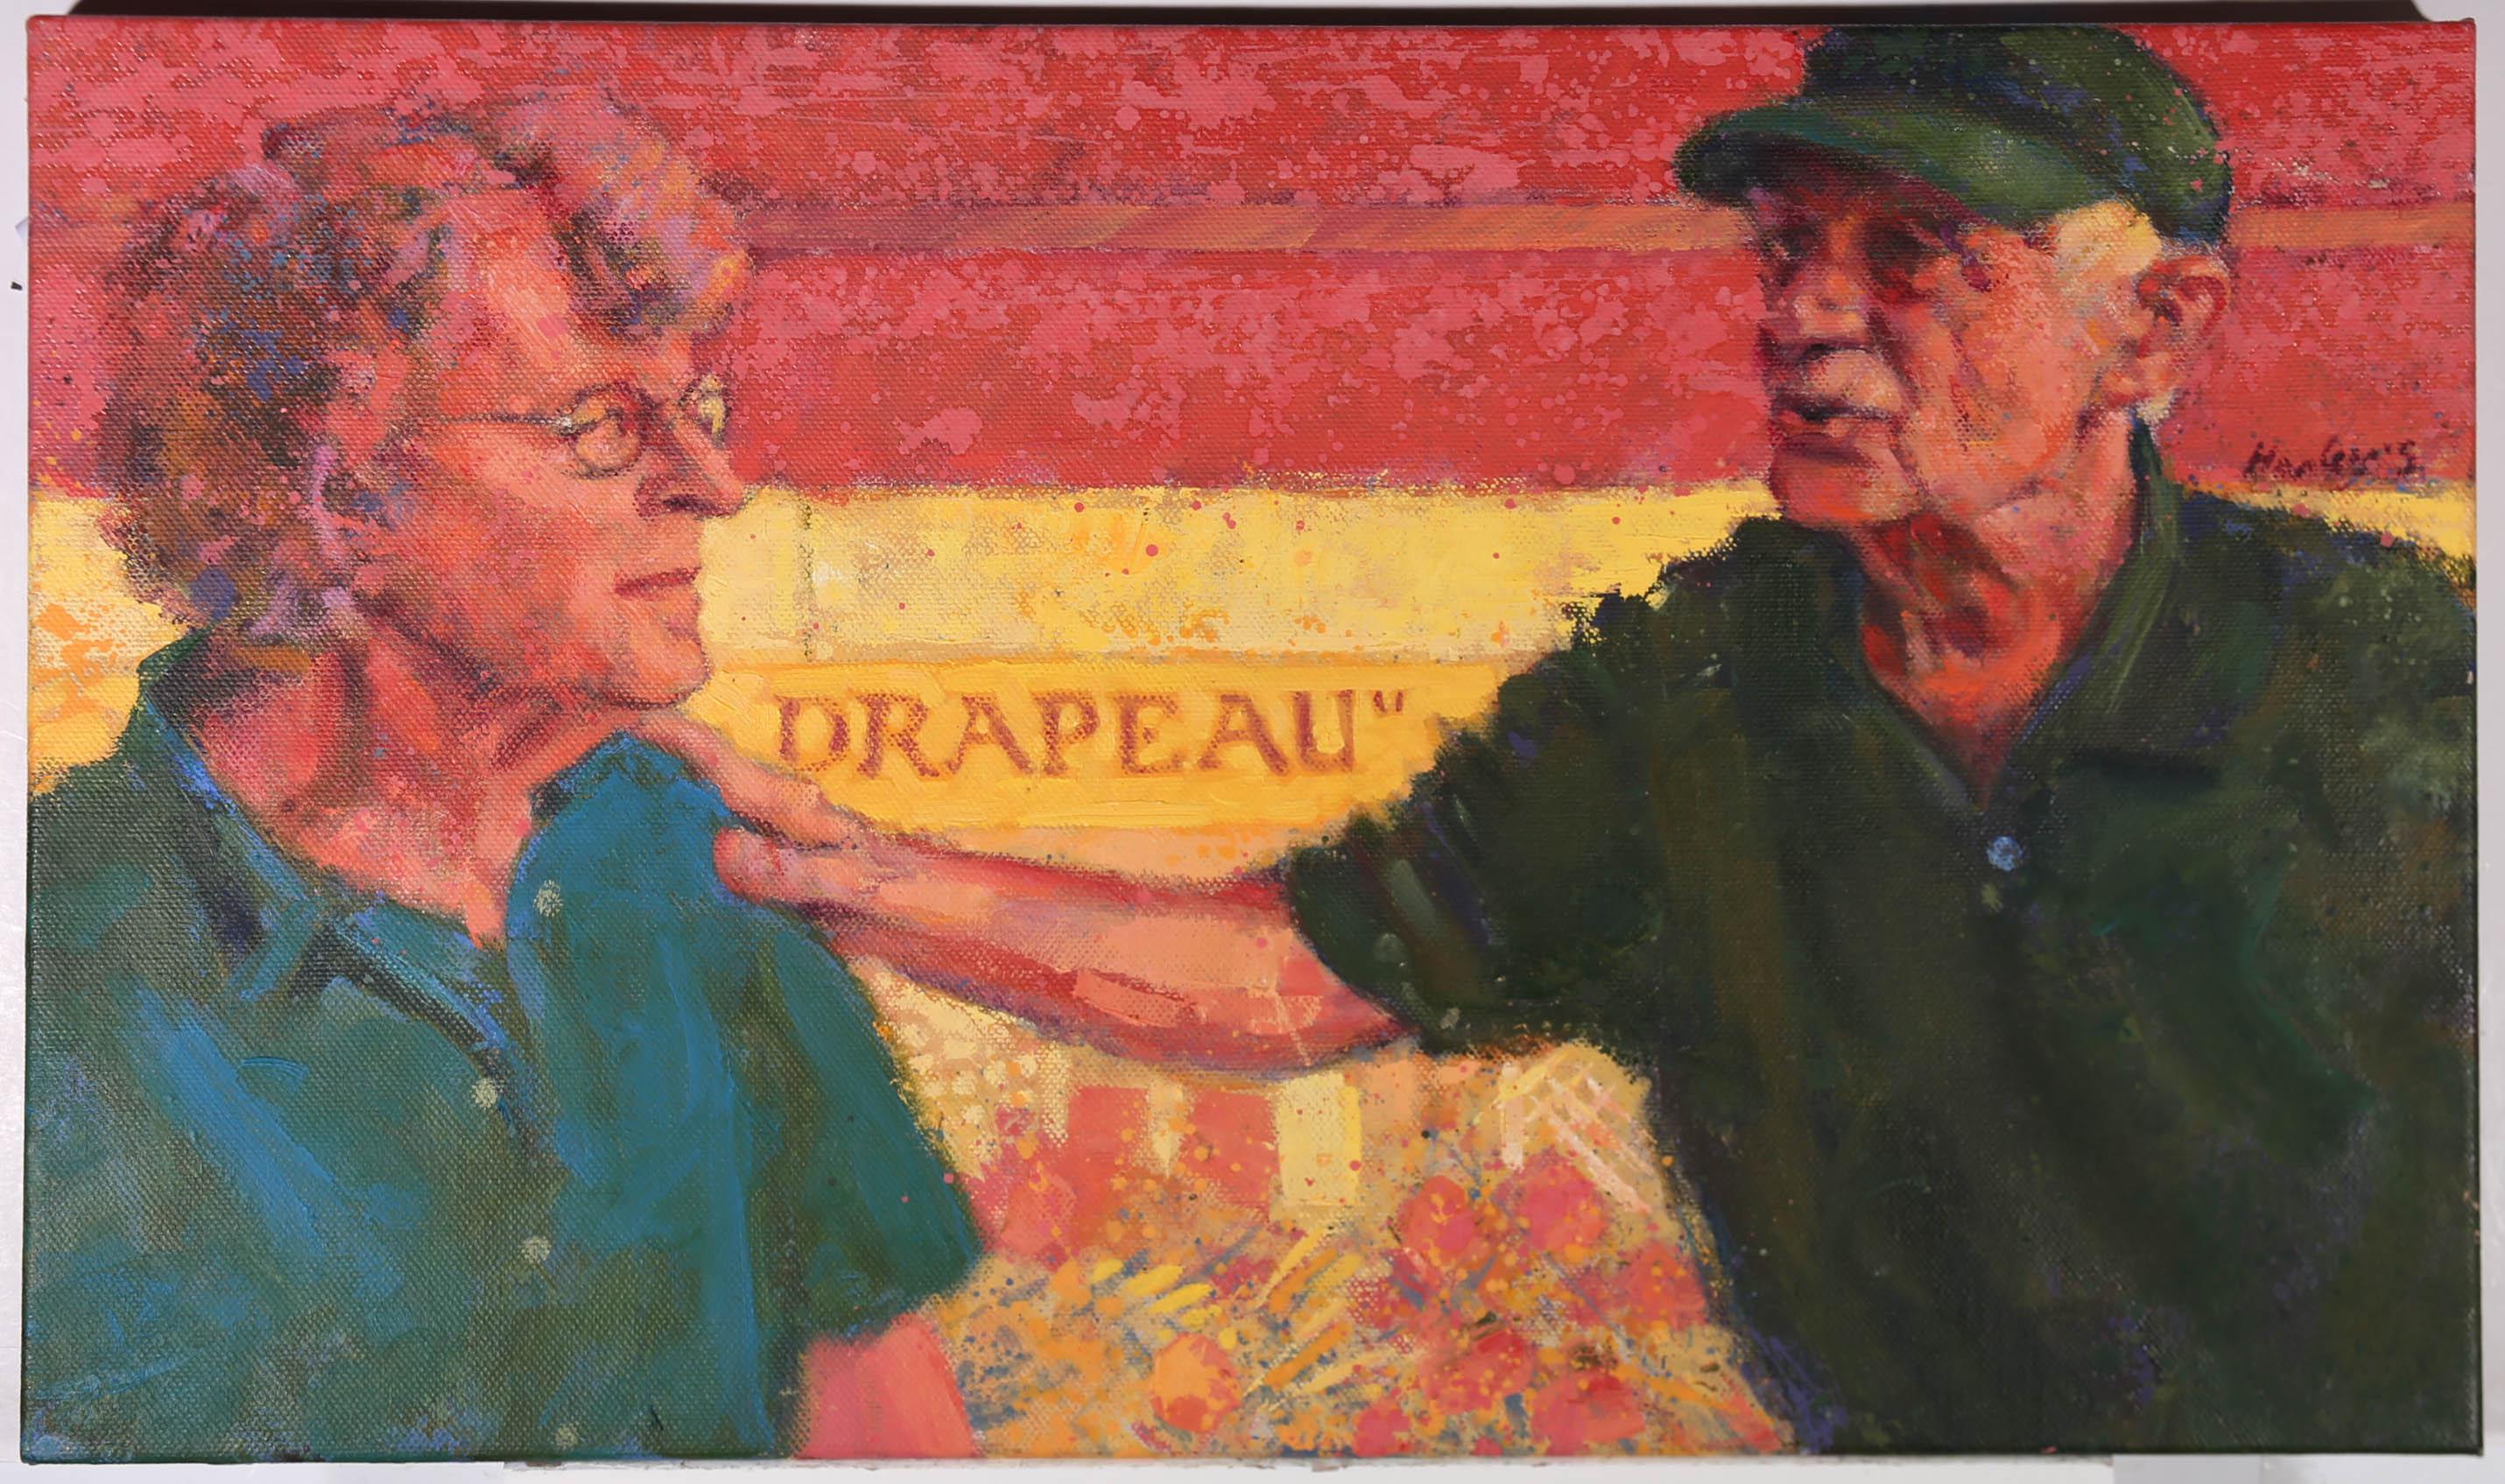 This charming portrait depicts an elderly couple in conversation. The man tenderly puts his hand on the woman's shoulder as he speaks to her. Signed and dated to the upper right. On canvas on stretchers.